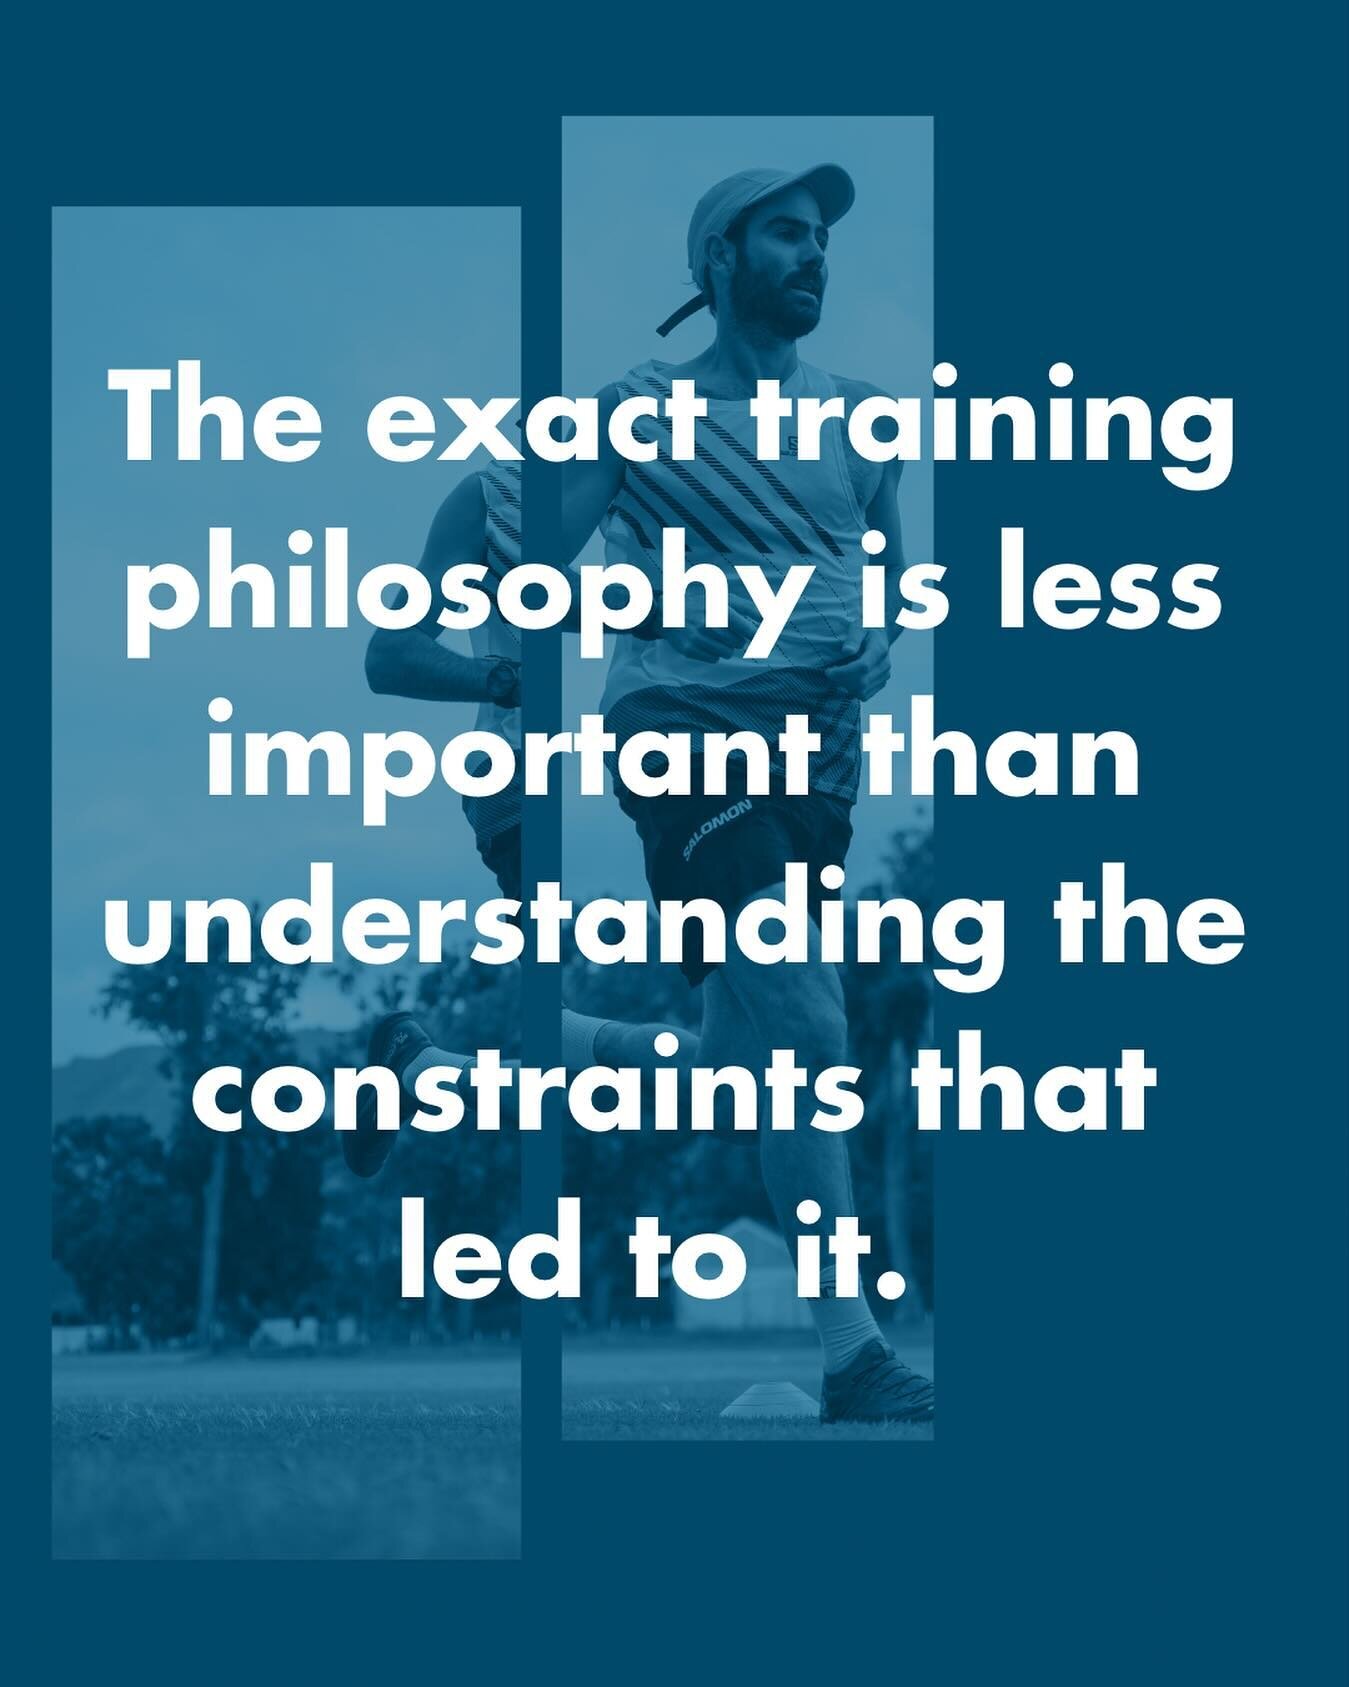 Too often we copy training sessions or philosophies without any understanding of the context and intention behind them. The magic is not in the workout or philosophy but instead in the ability to objectively and gradually expose the athlete to the ri